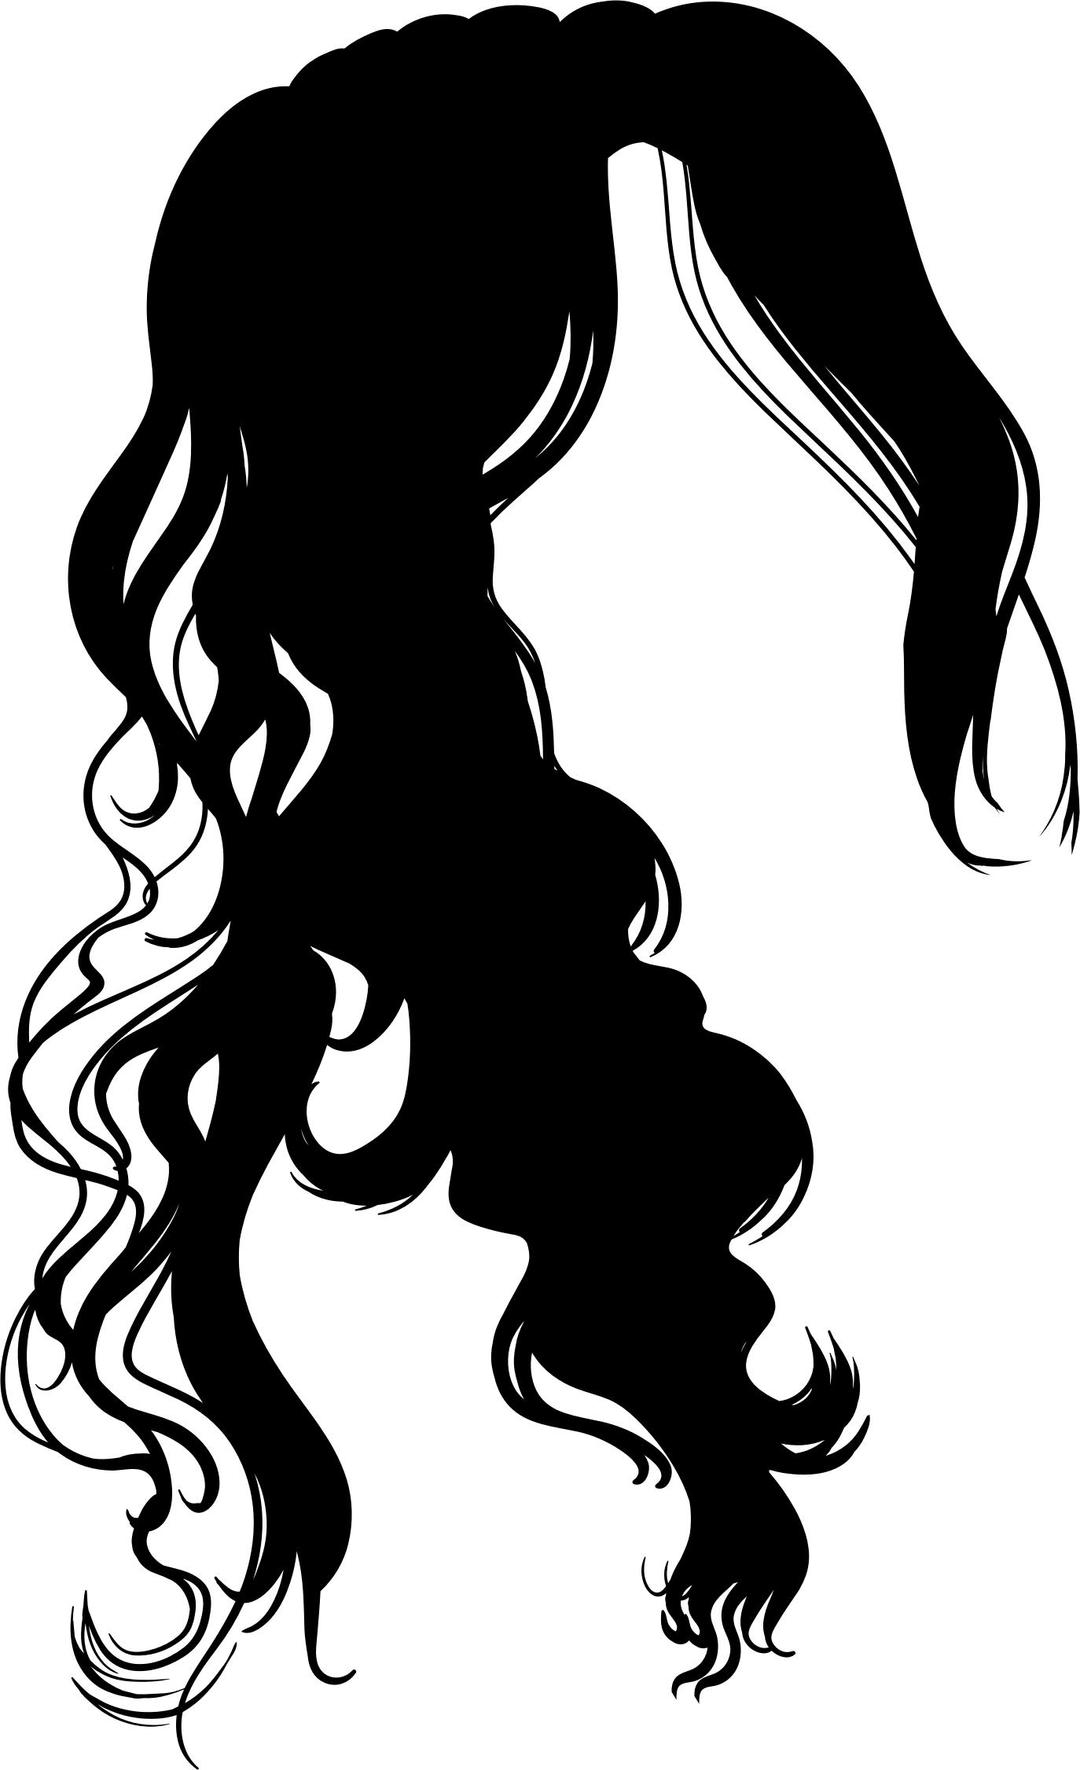 Female Hair Silhouette png transparent